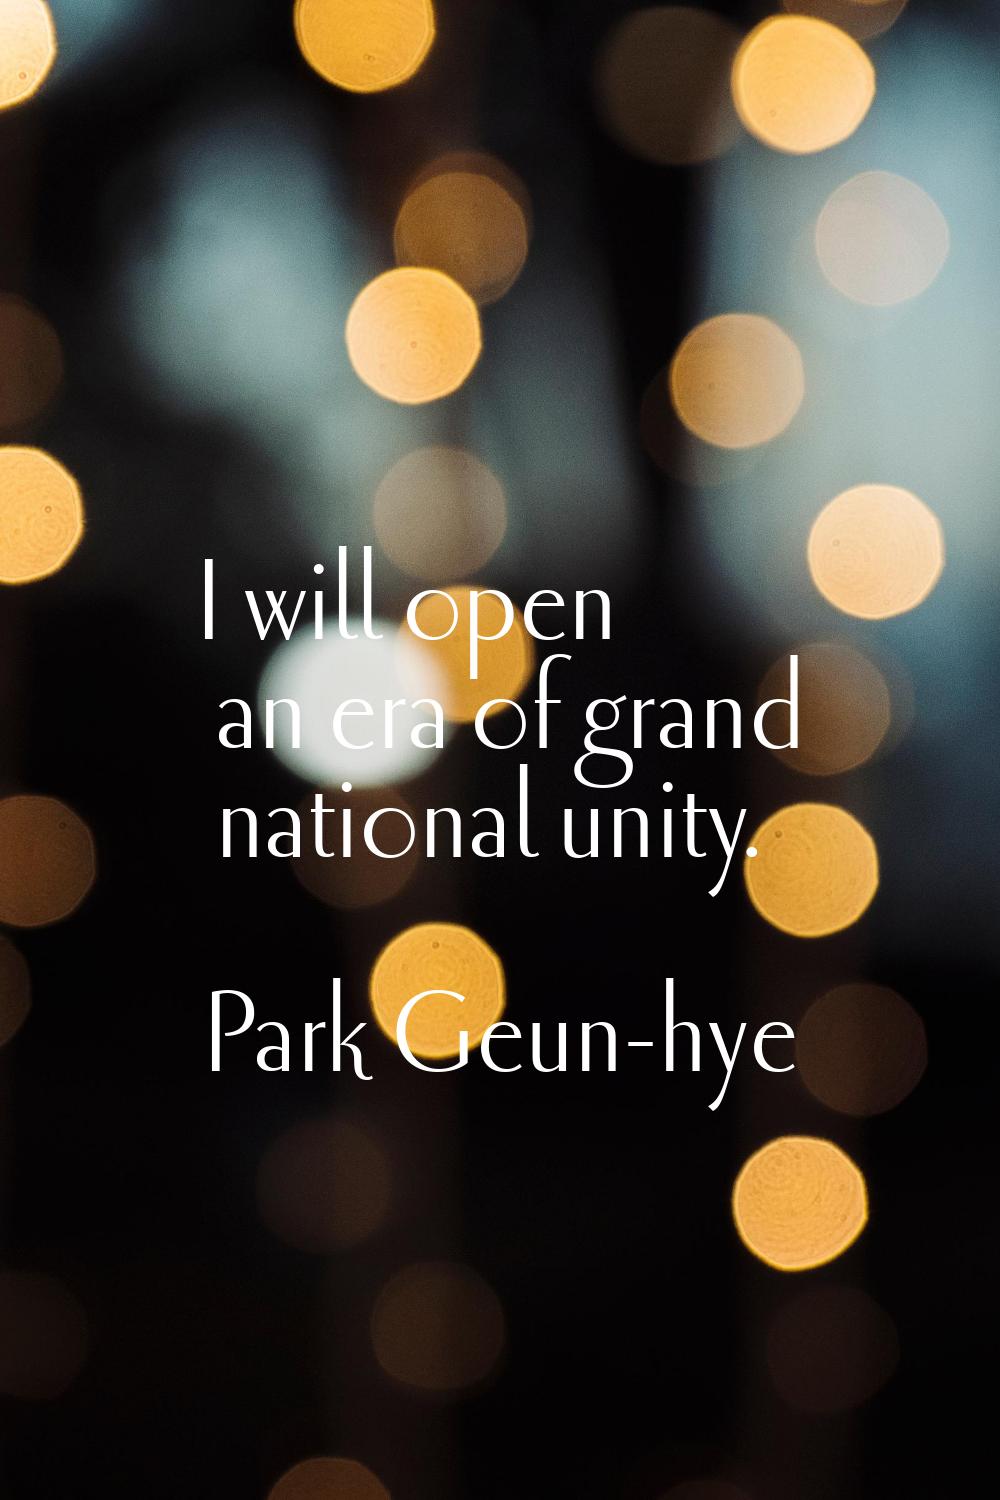 I will open an era of grand national unity.